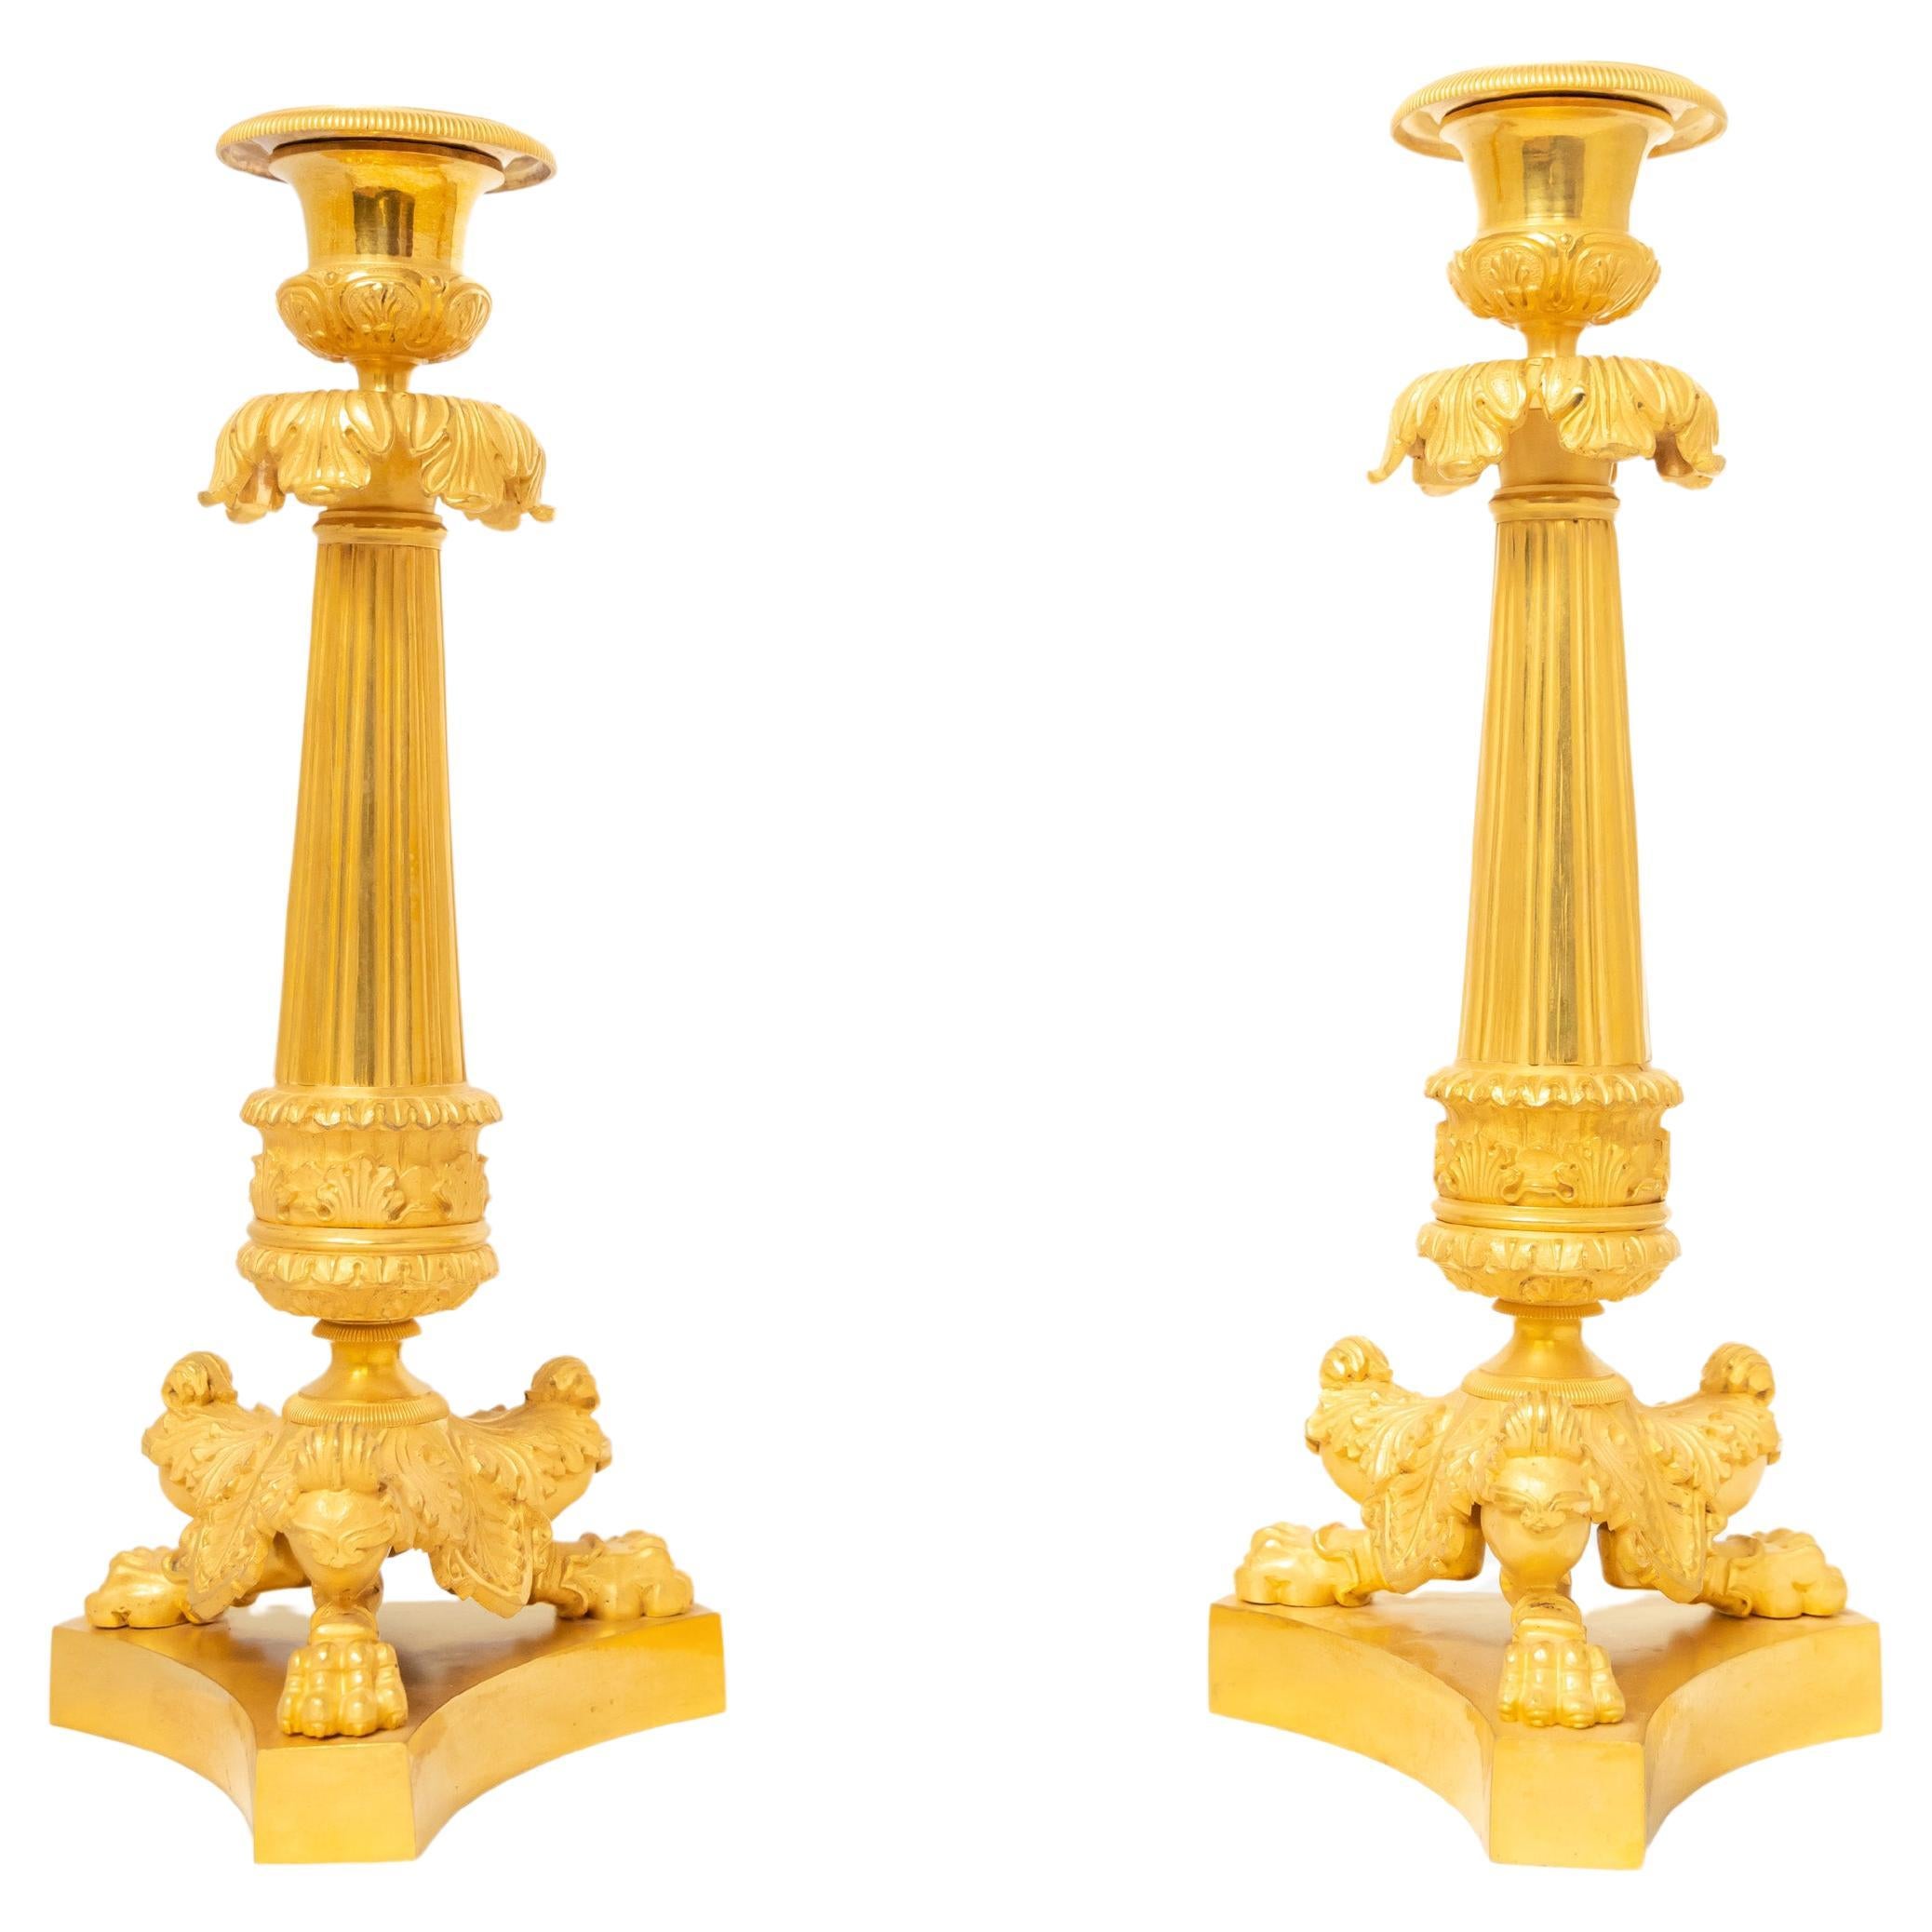 Pair of Gilded Bronze Candlesticks from French Restauration Era